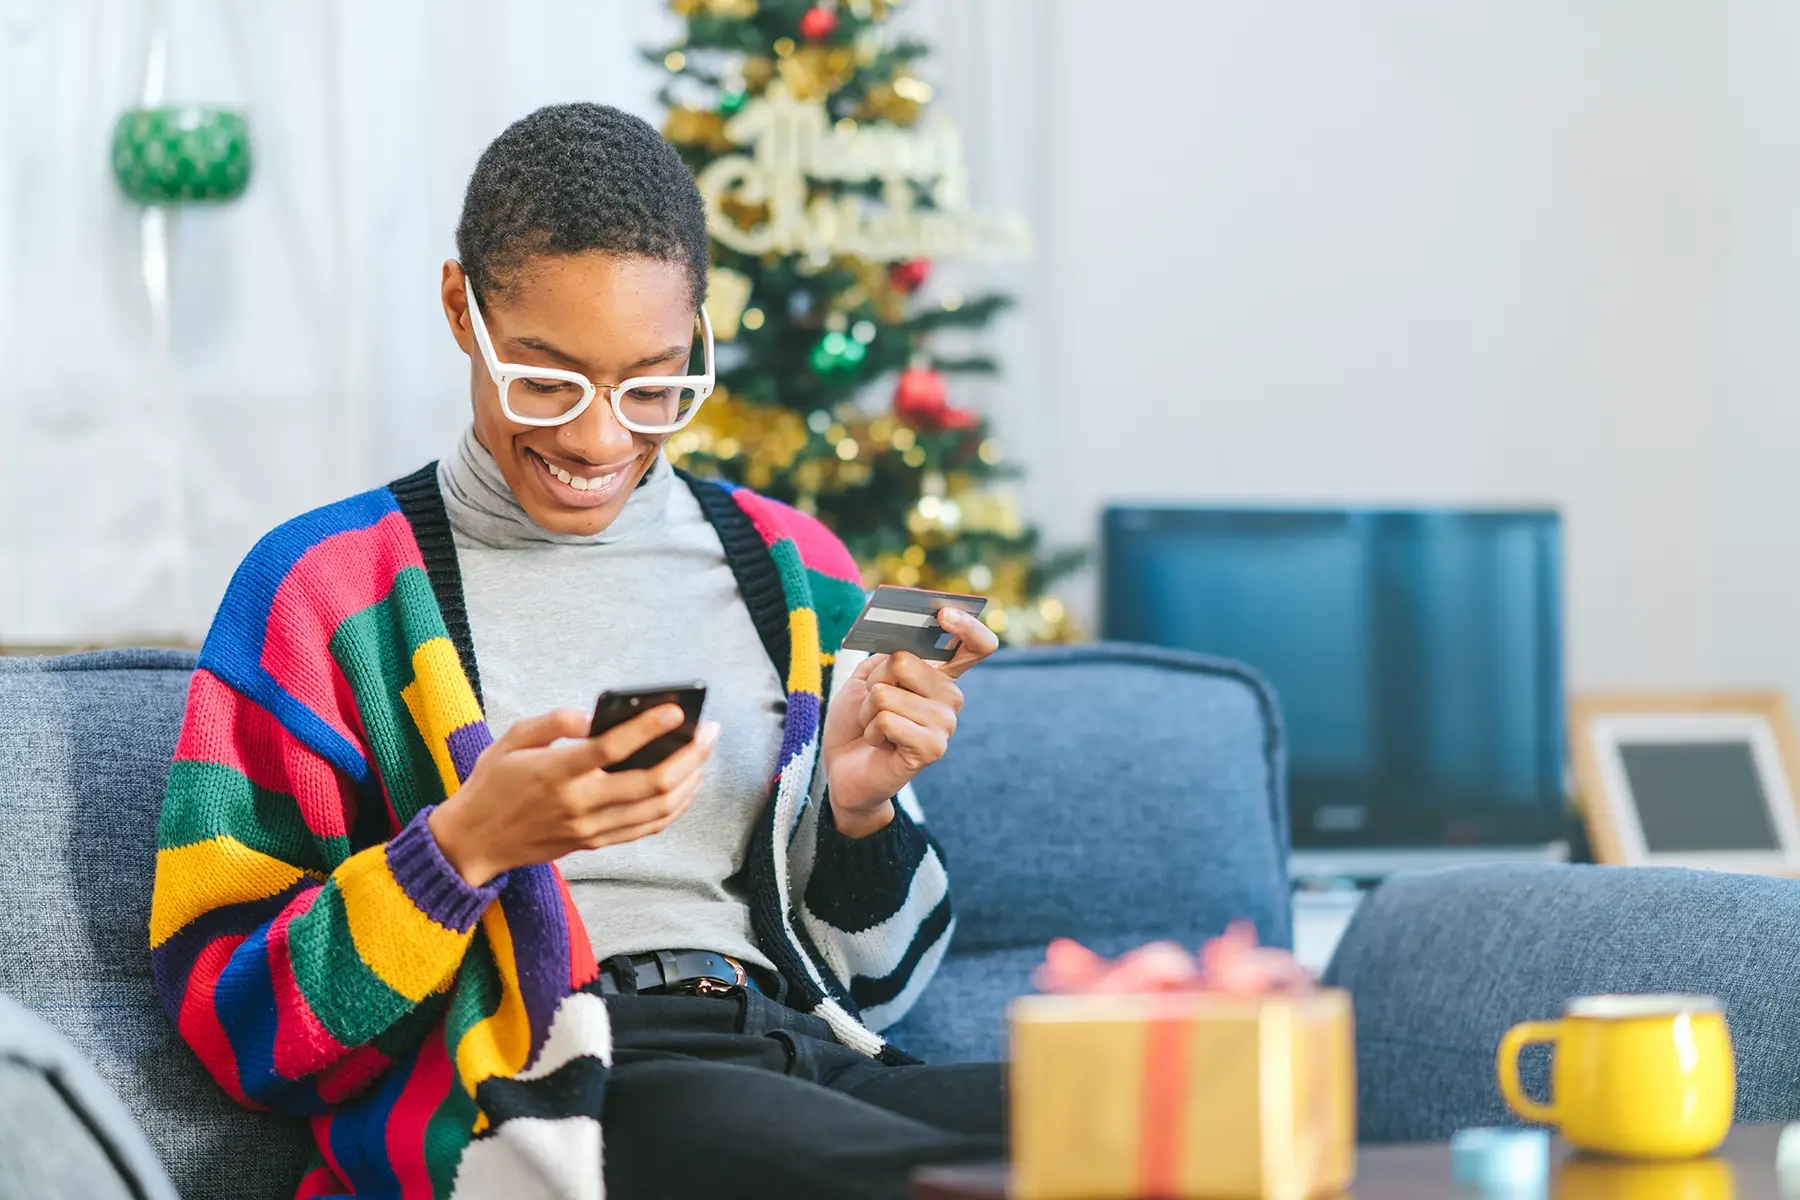 A woman in a brightly colored stripy jumper sits on the sofa, paying for something on her phone.